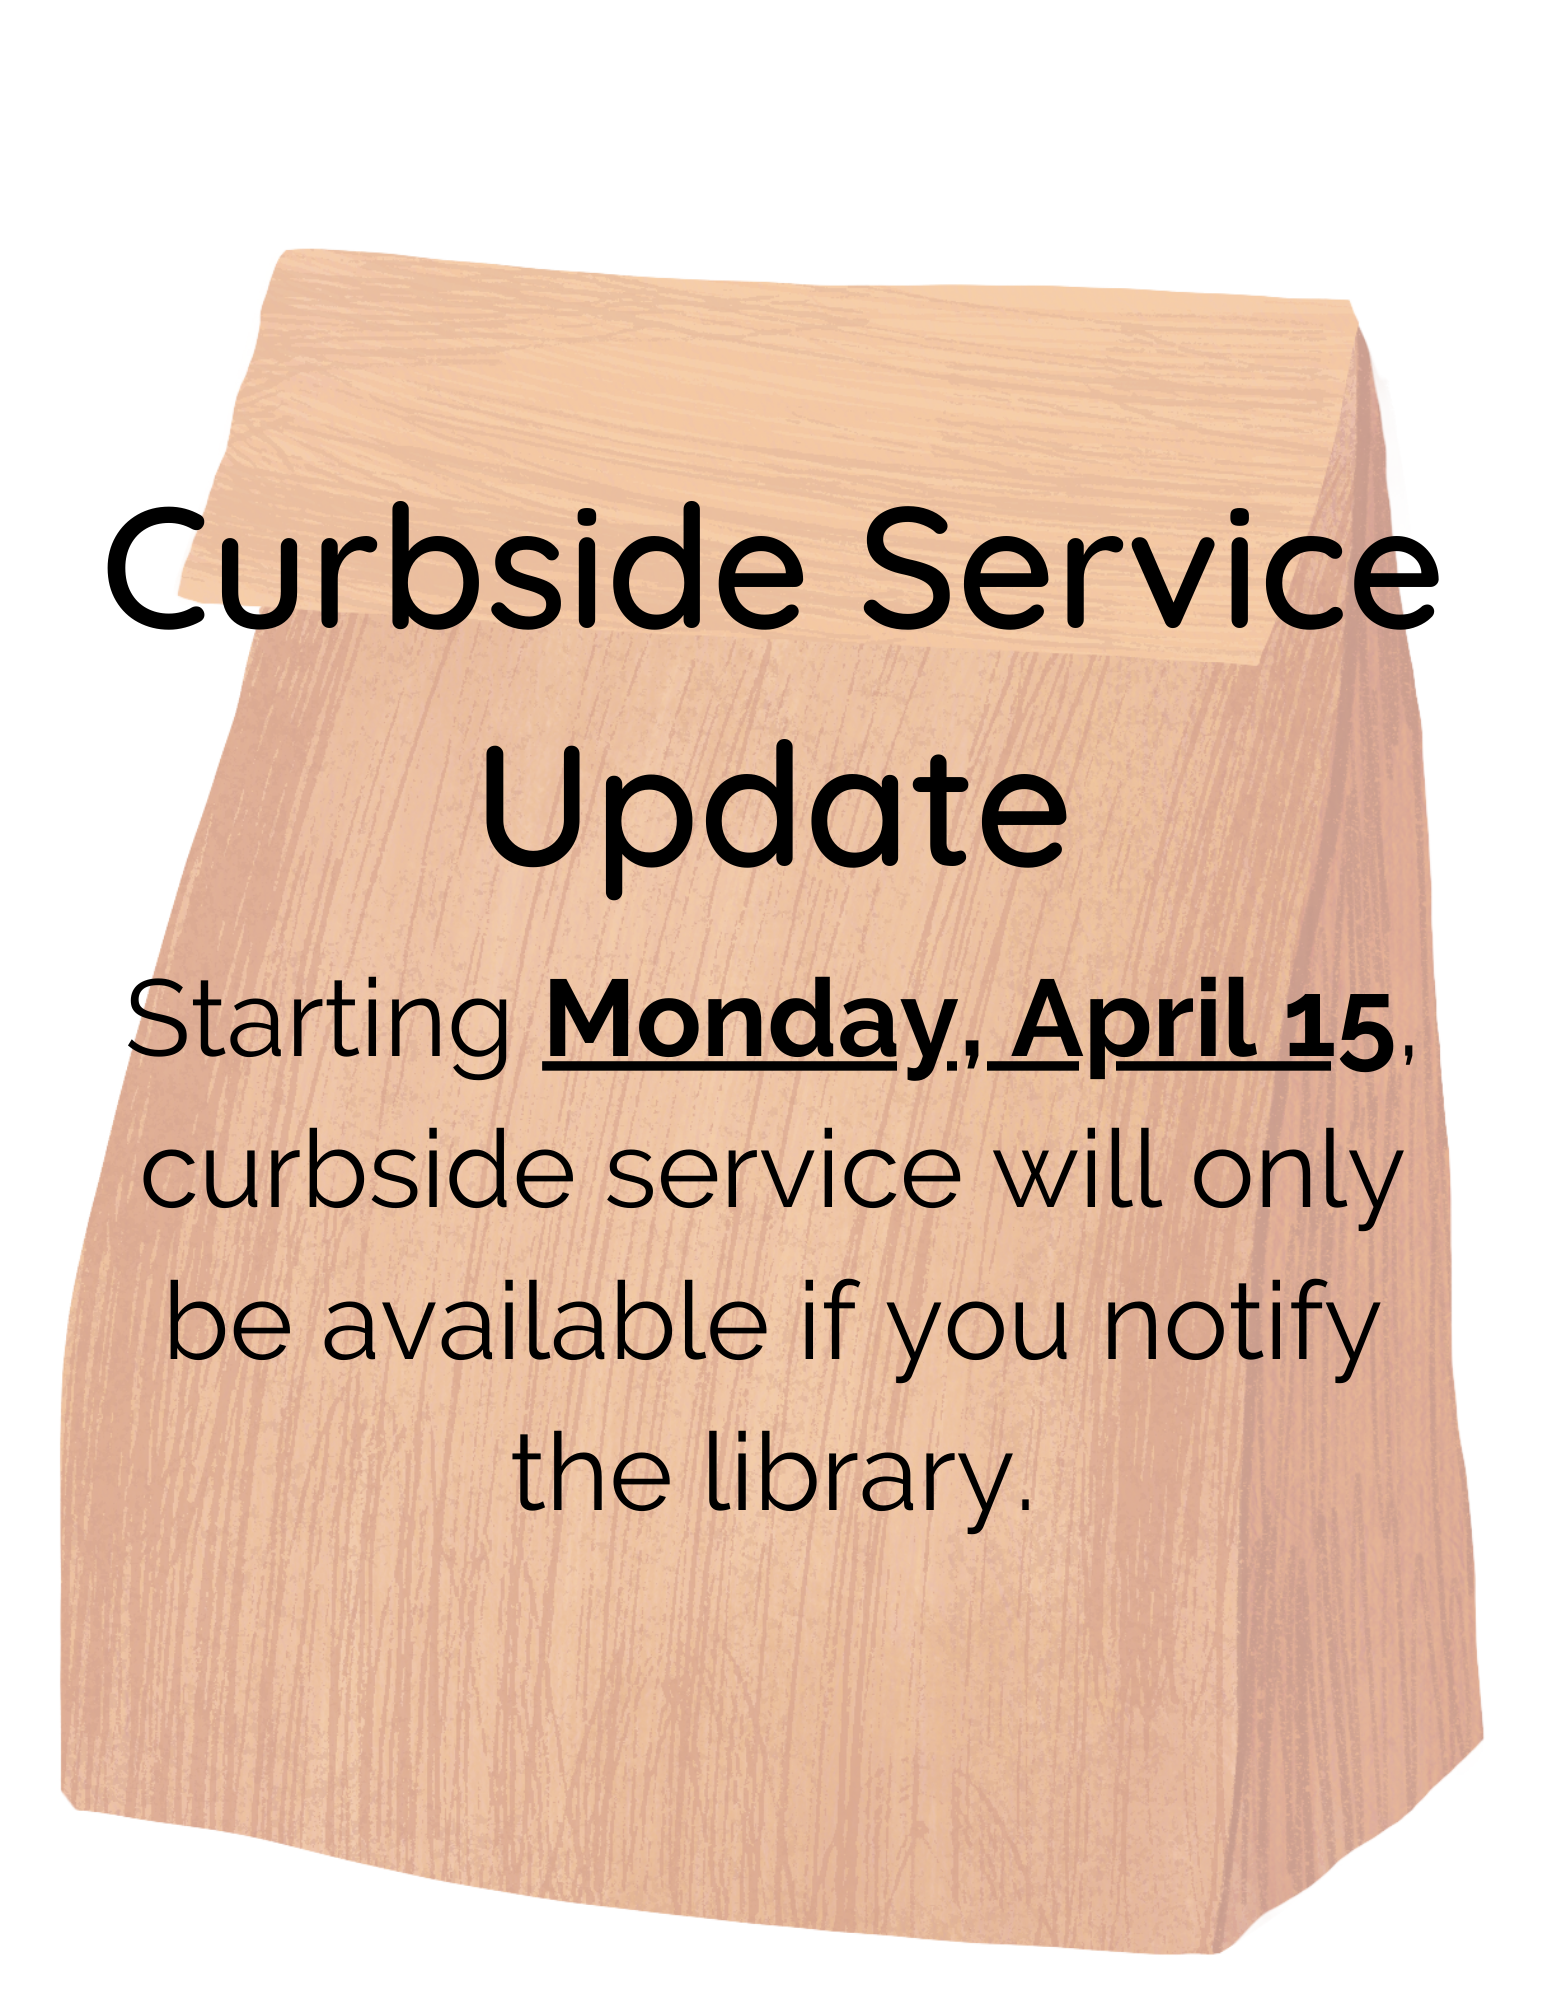 As of Monday, April 15th, curbside service will only be available if you notify the library.